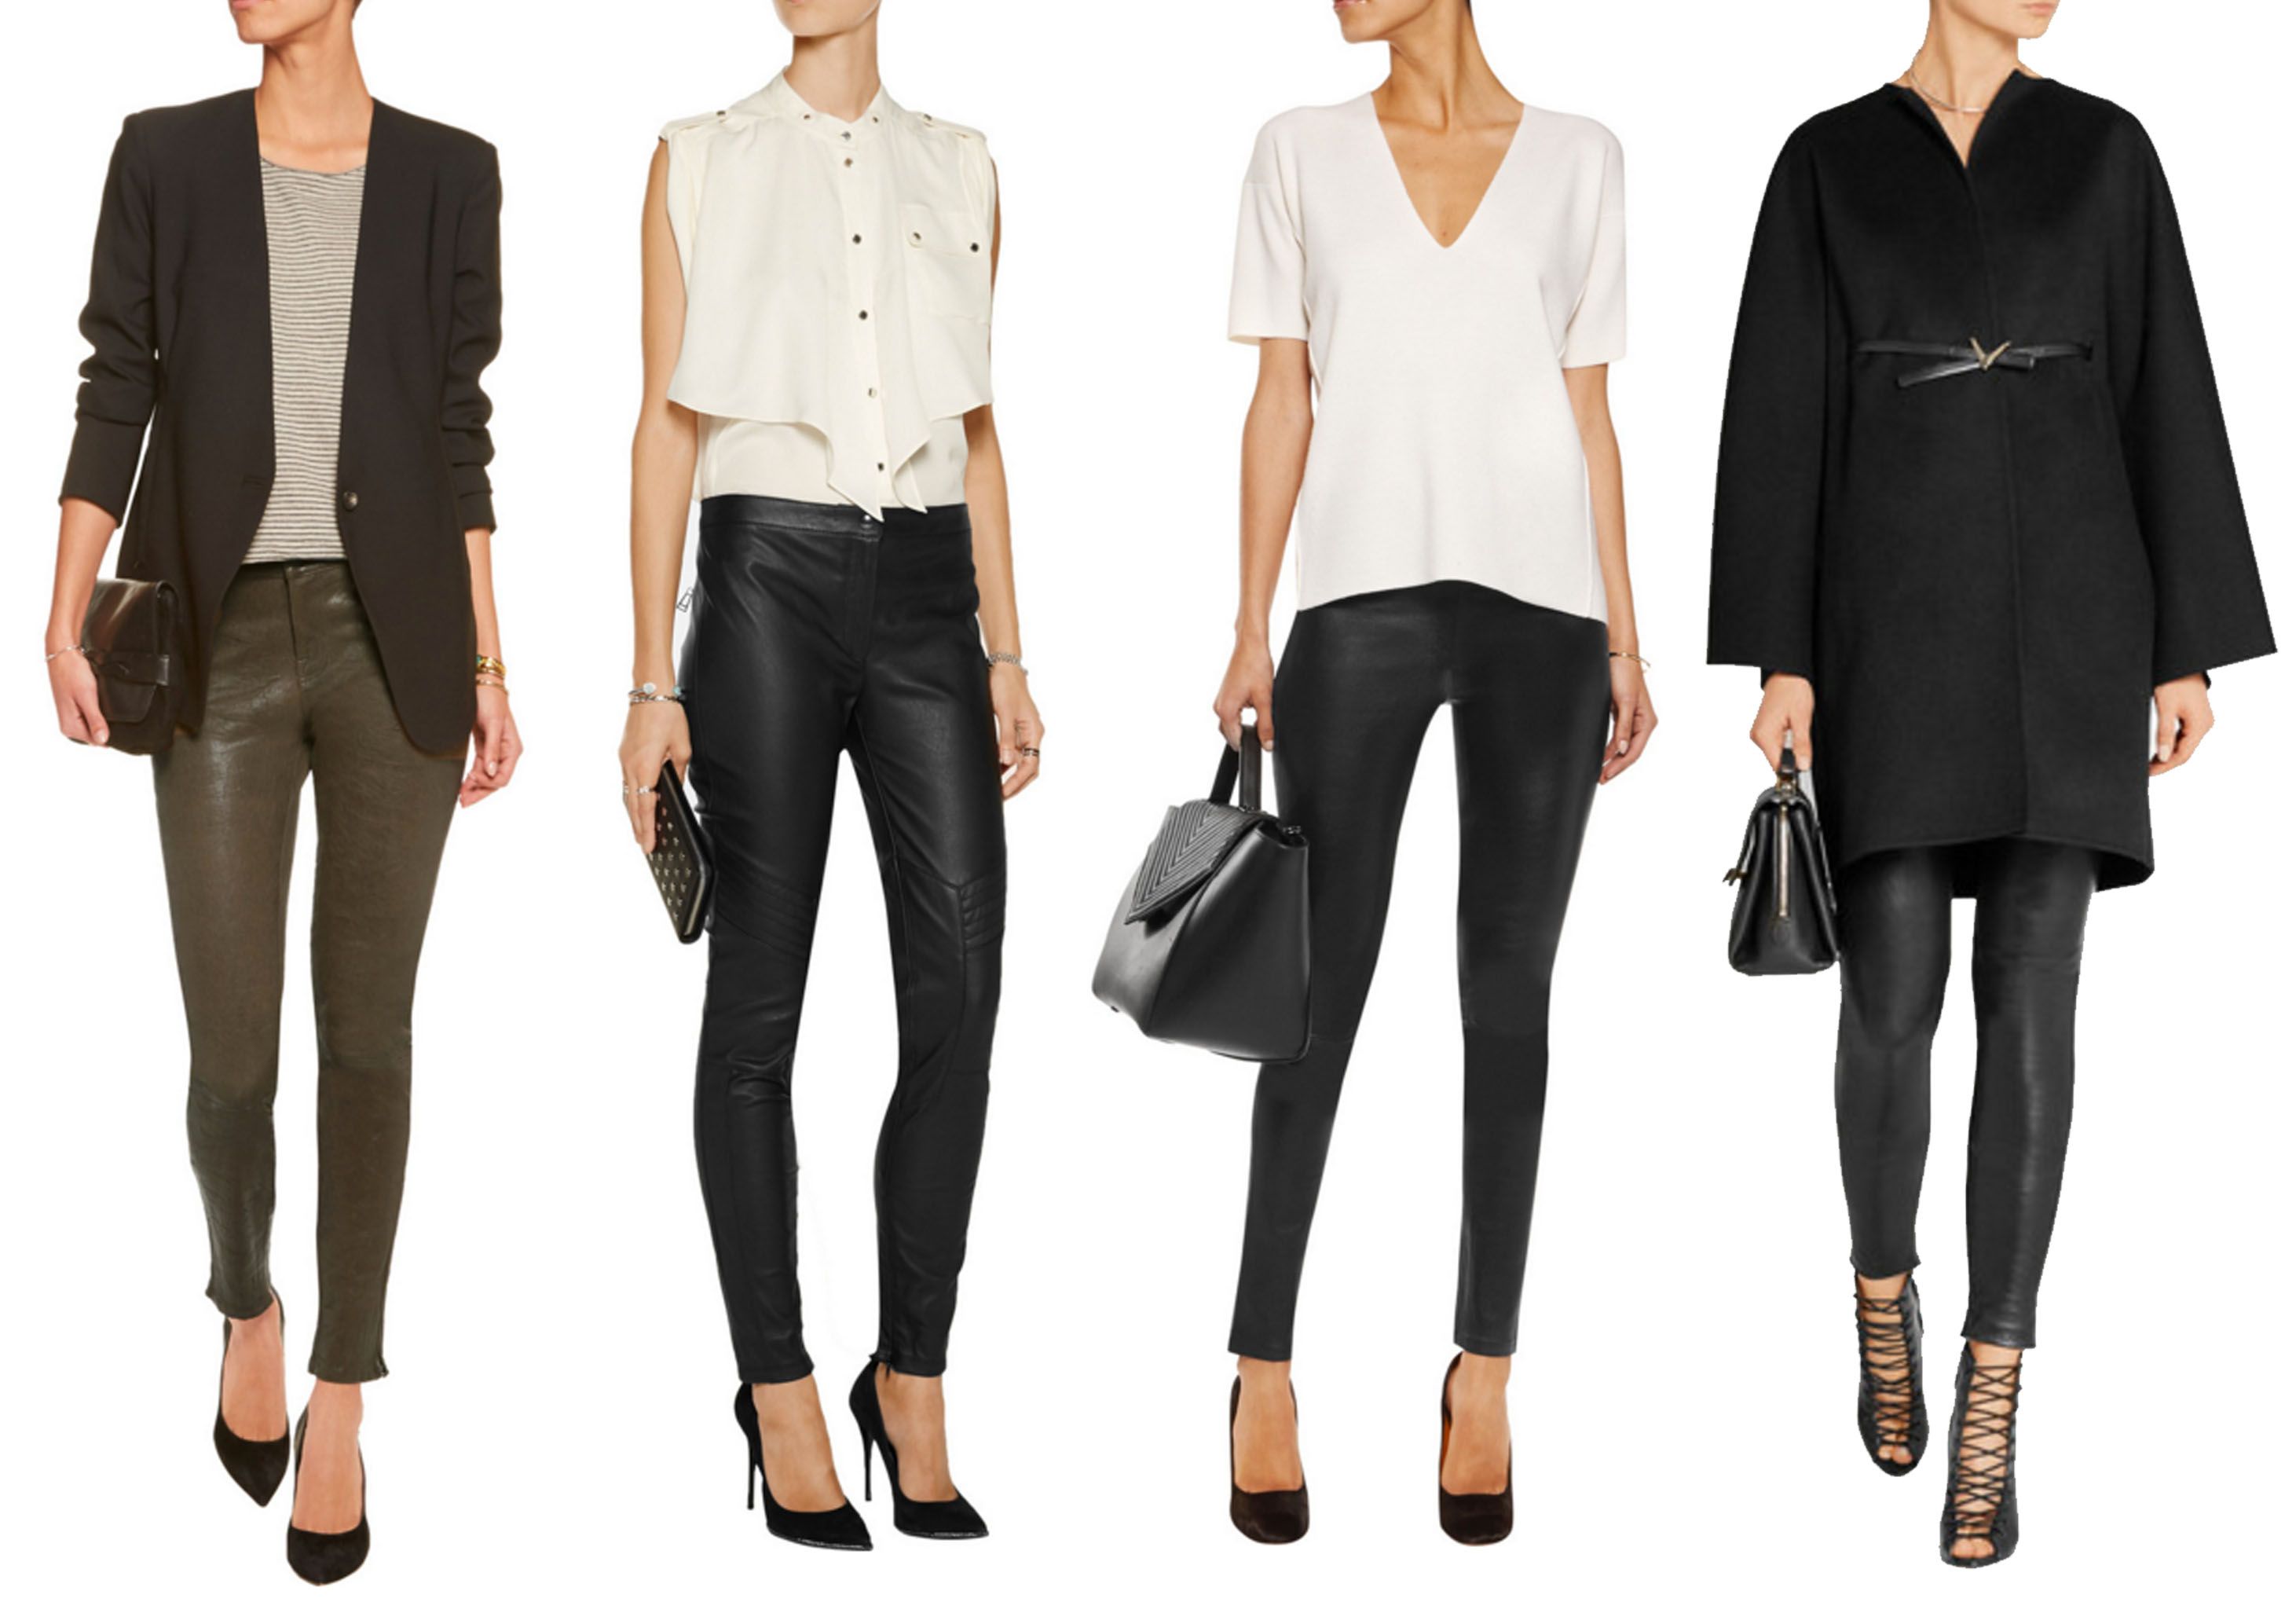 Going to the Office in Leggings?  Why Not, Here Are 4 Tips for Wearing Leggings at the Office